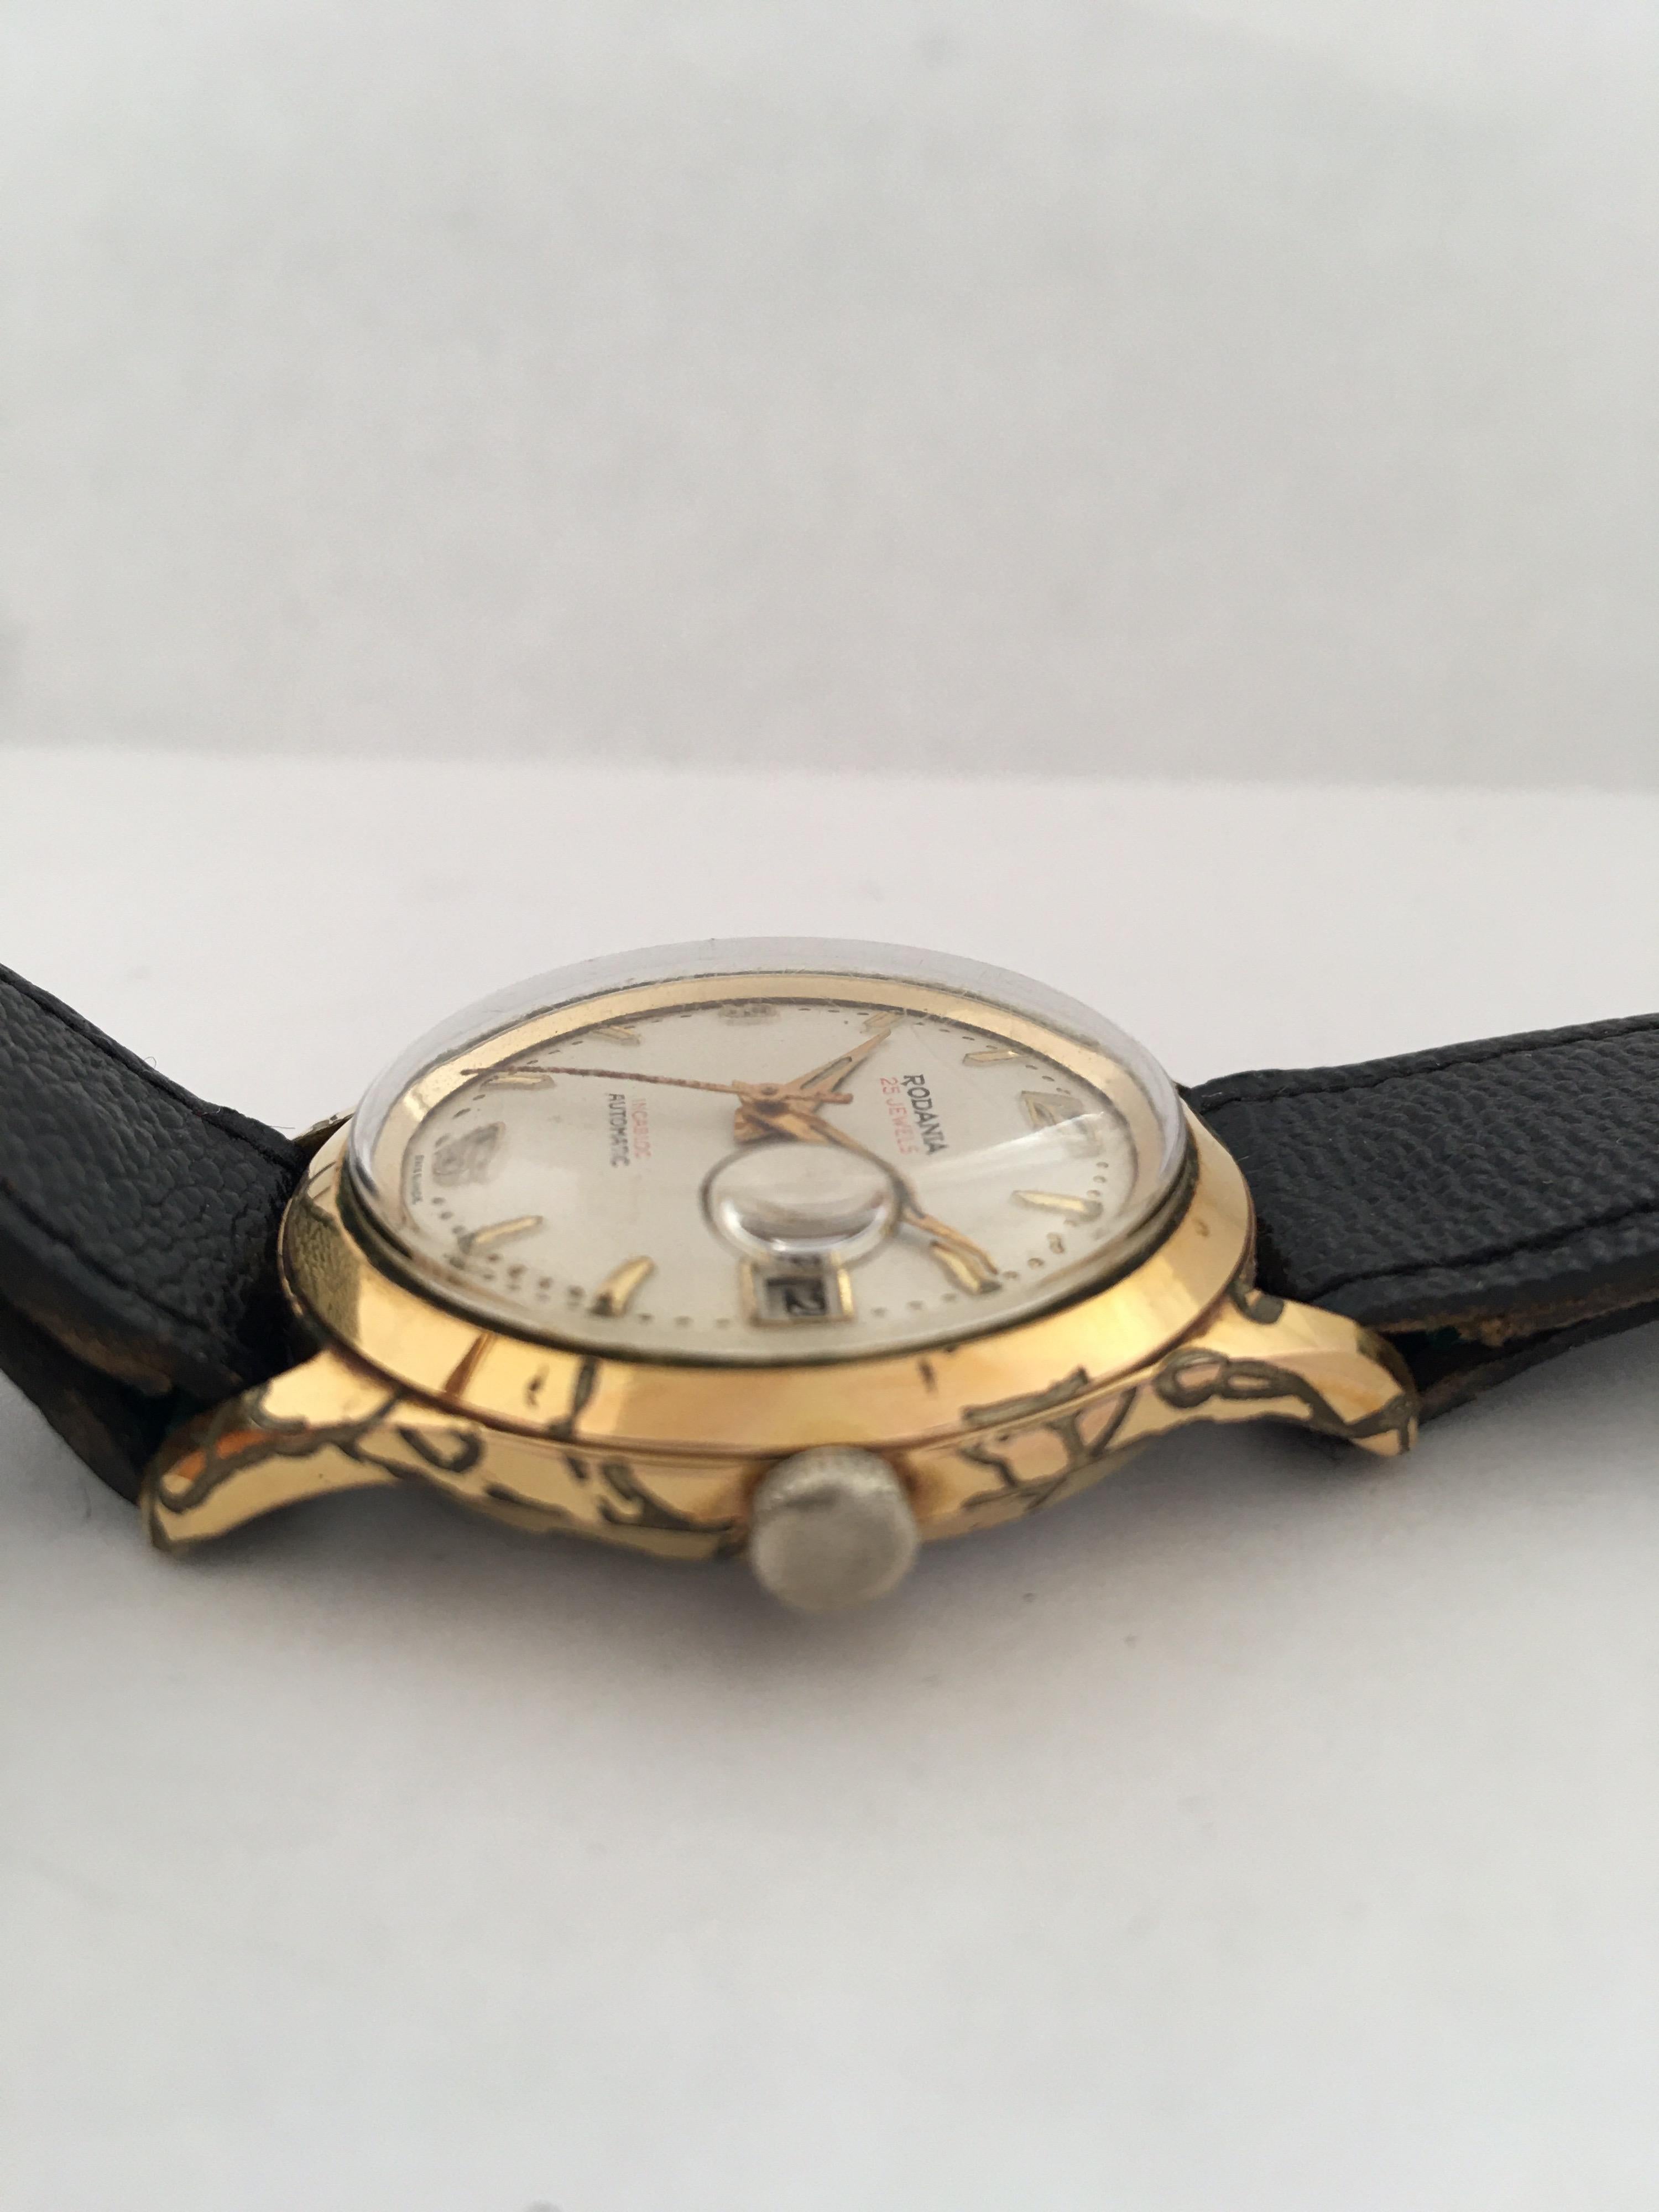 Vintage 1950s Gold-Plated and Stainless Steel 25 Jewels Swiss Automatic Watch For Sale 2